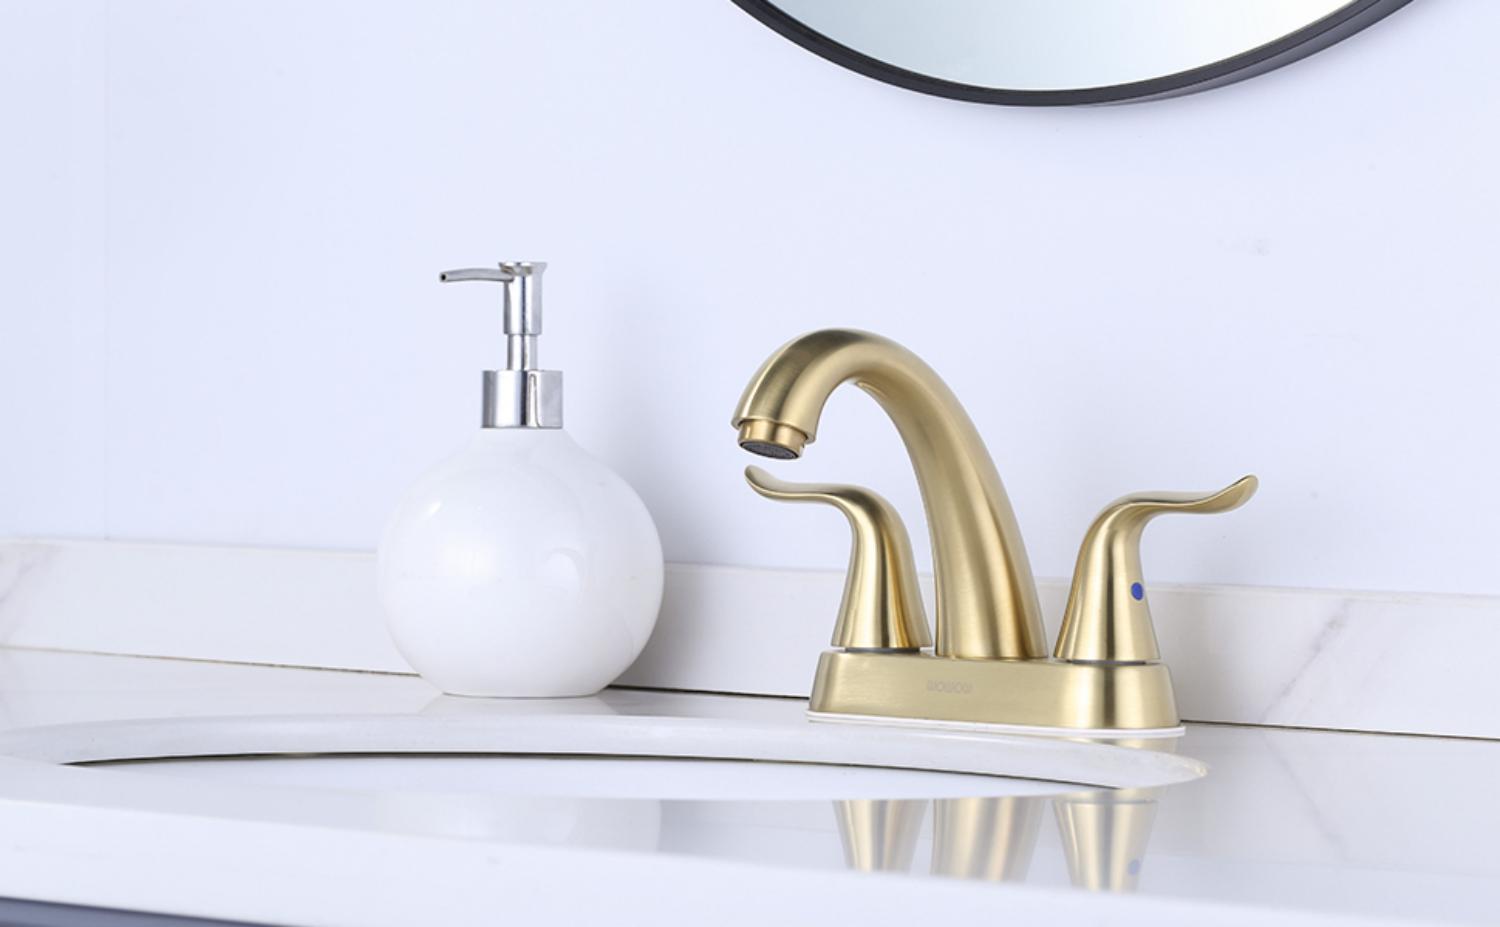 iVIGA Brushed Gold Bathroom Faucet 2 Handle 4 Inch Centerset Bathroom Sink Faucet - Bathroom Faucets - 2